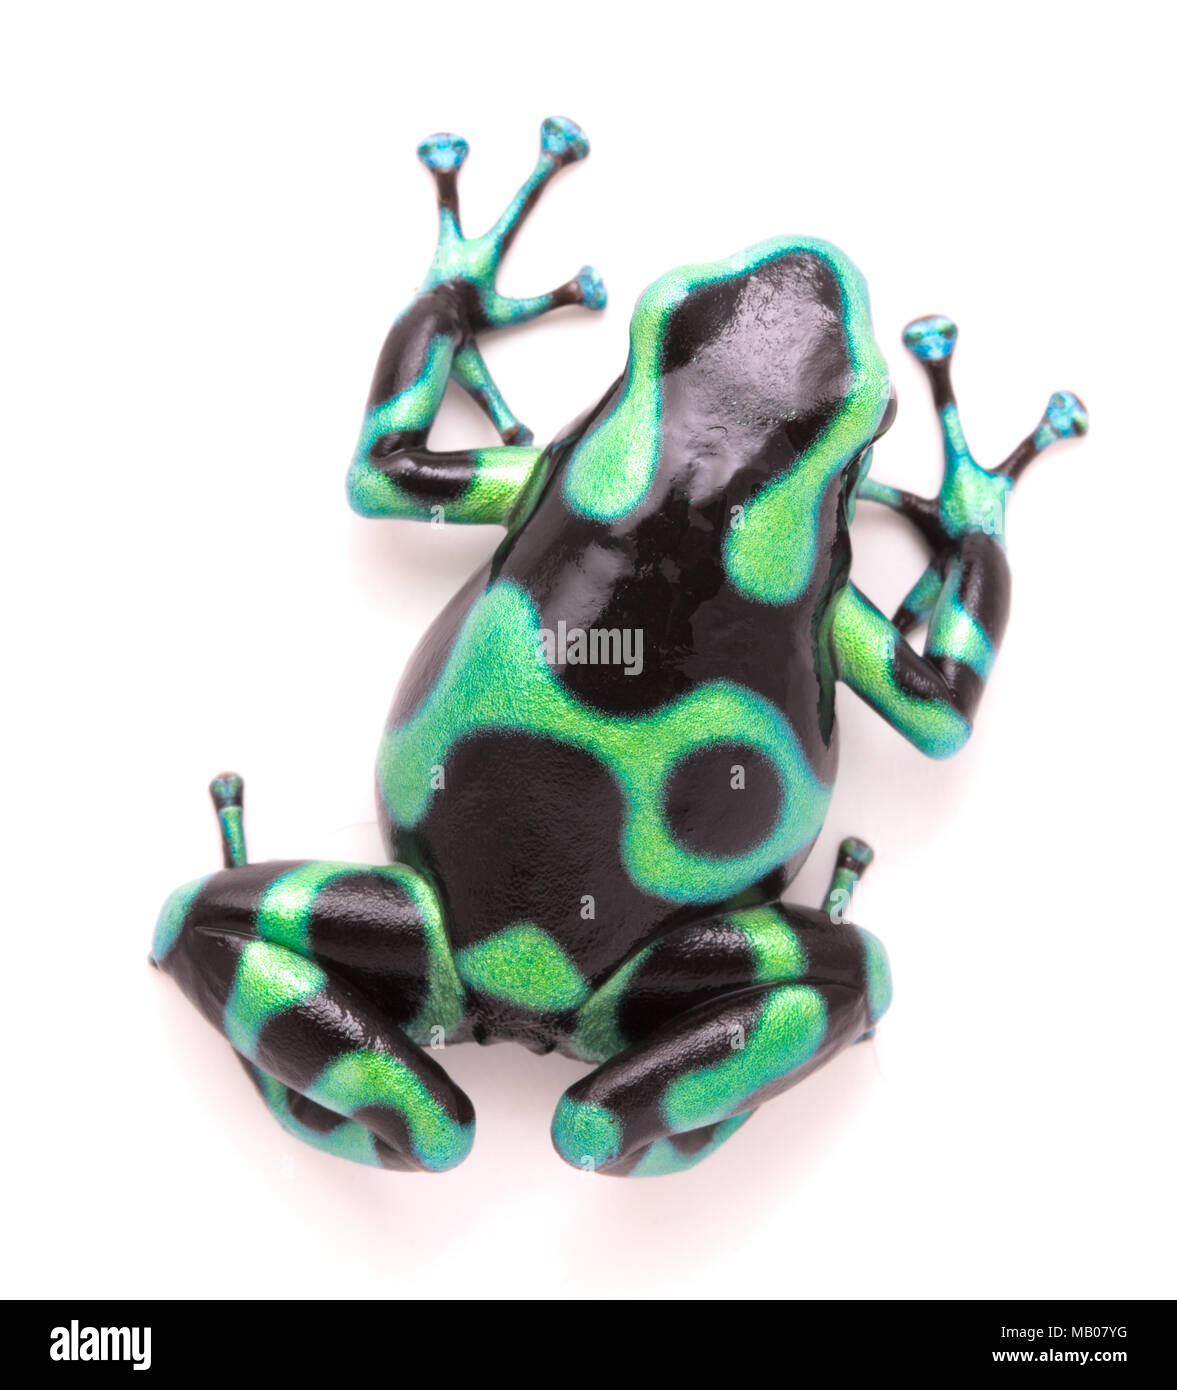 poison dart, Dendrobates auratus. A toxic tropical animal from the rain forest of Costa Rica. Isolated on a white background. Stock Photo